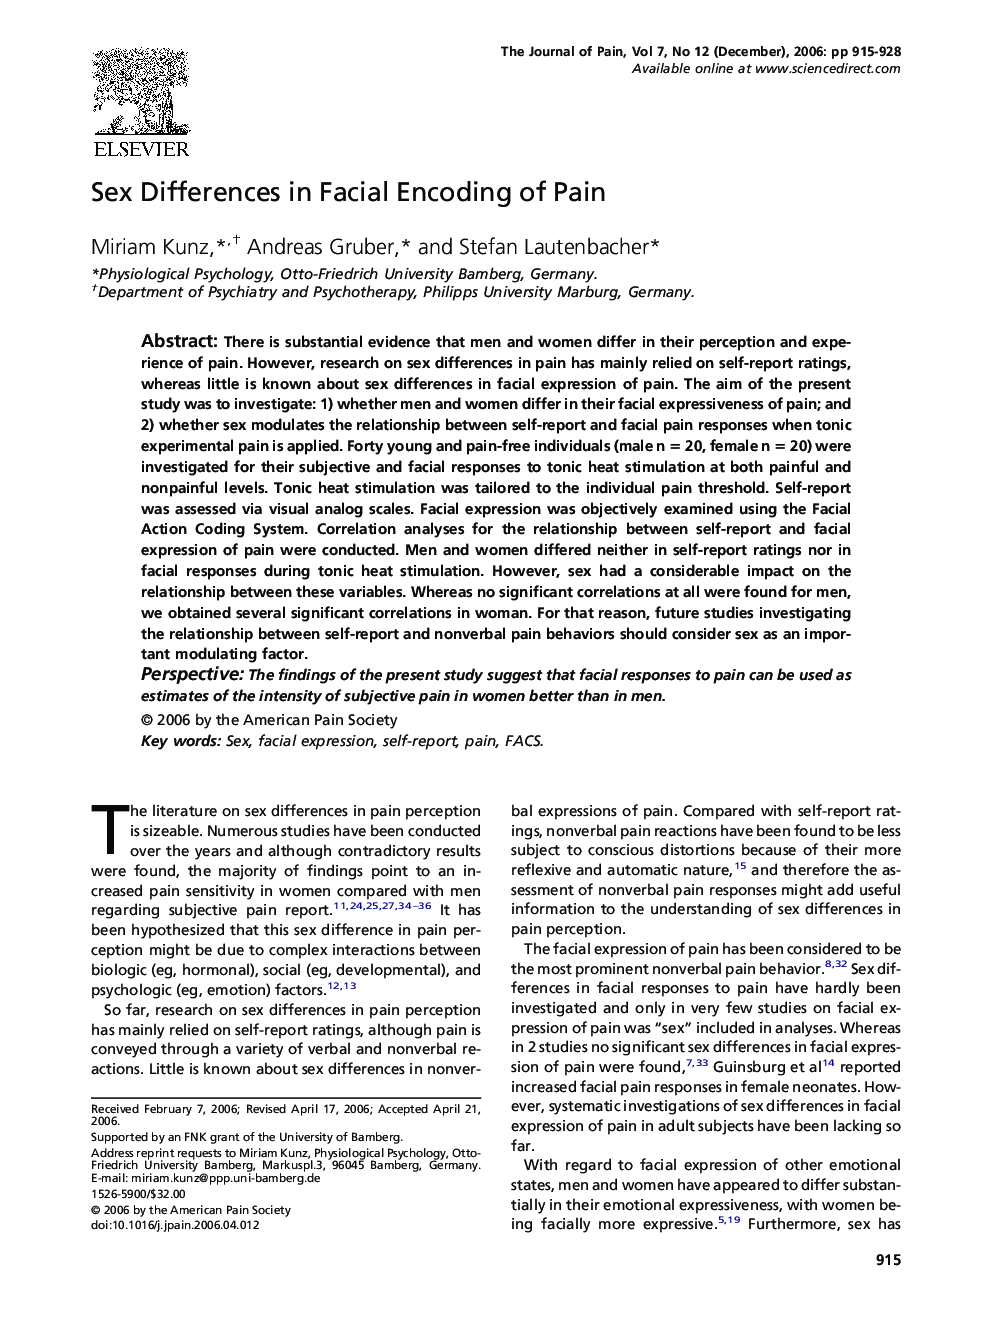 Sex Differences in Facial Encoding of Pain 